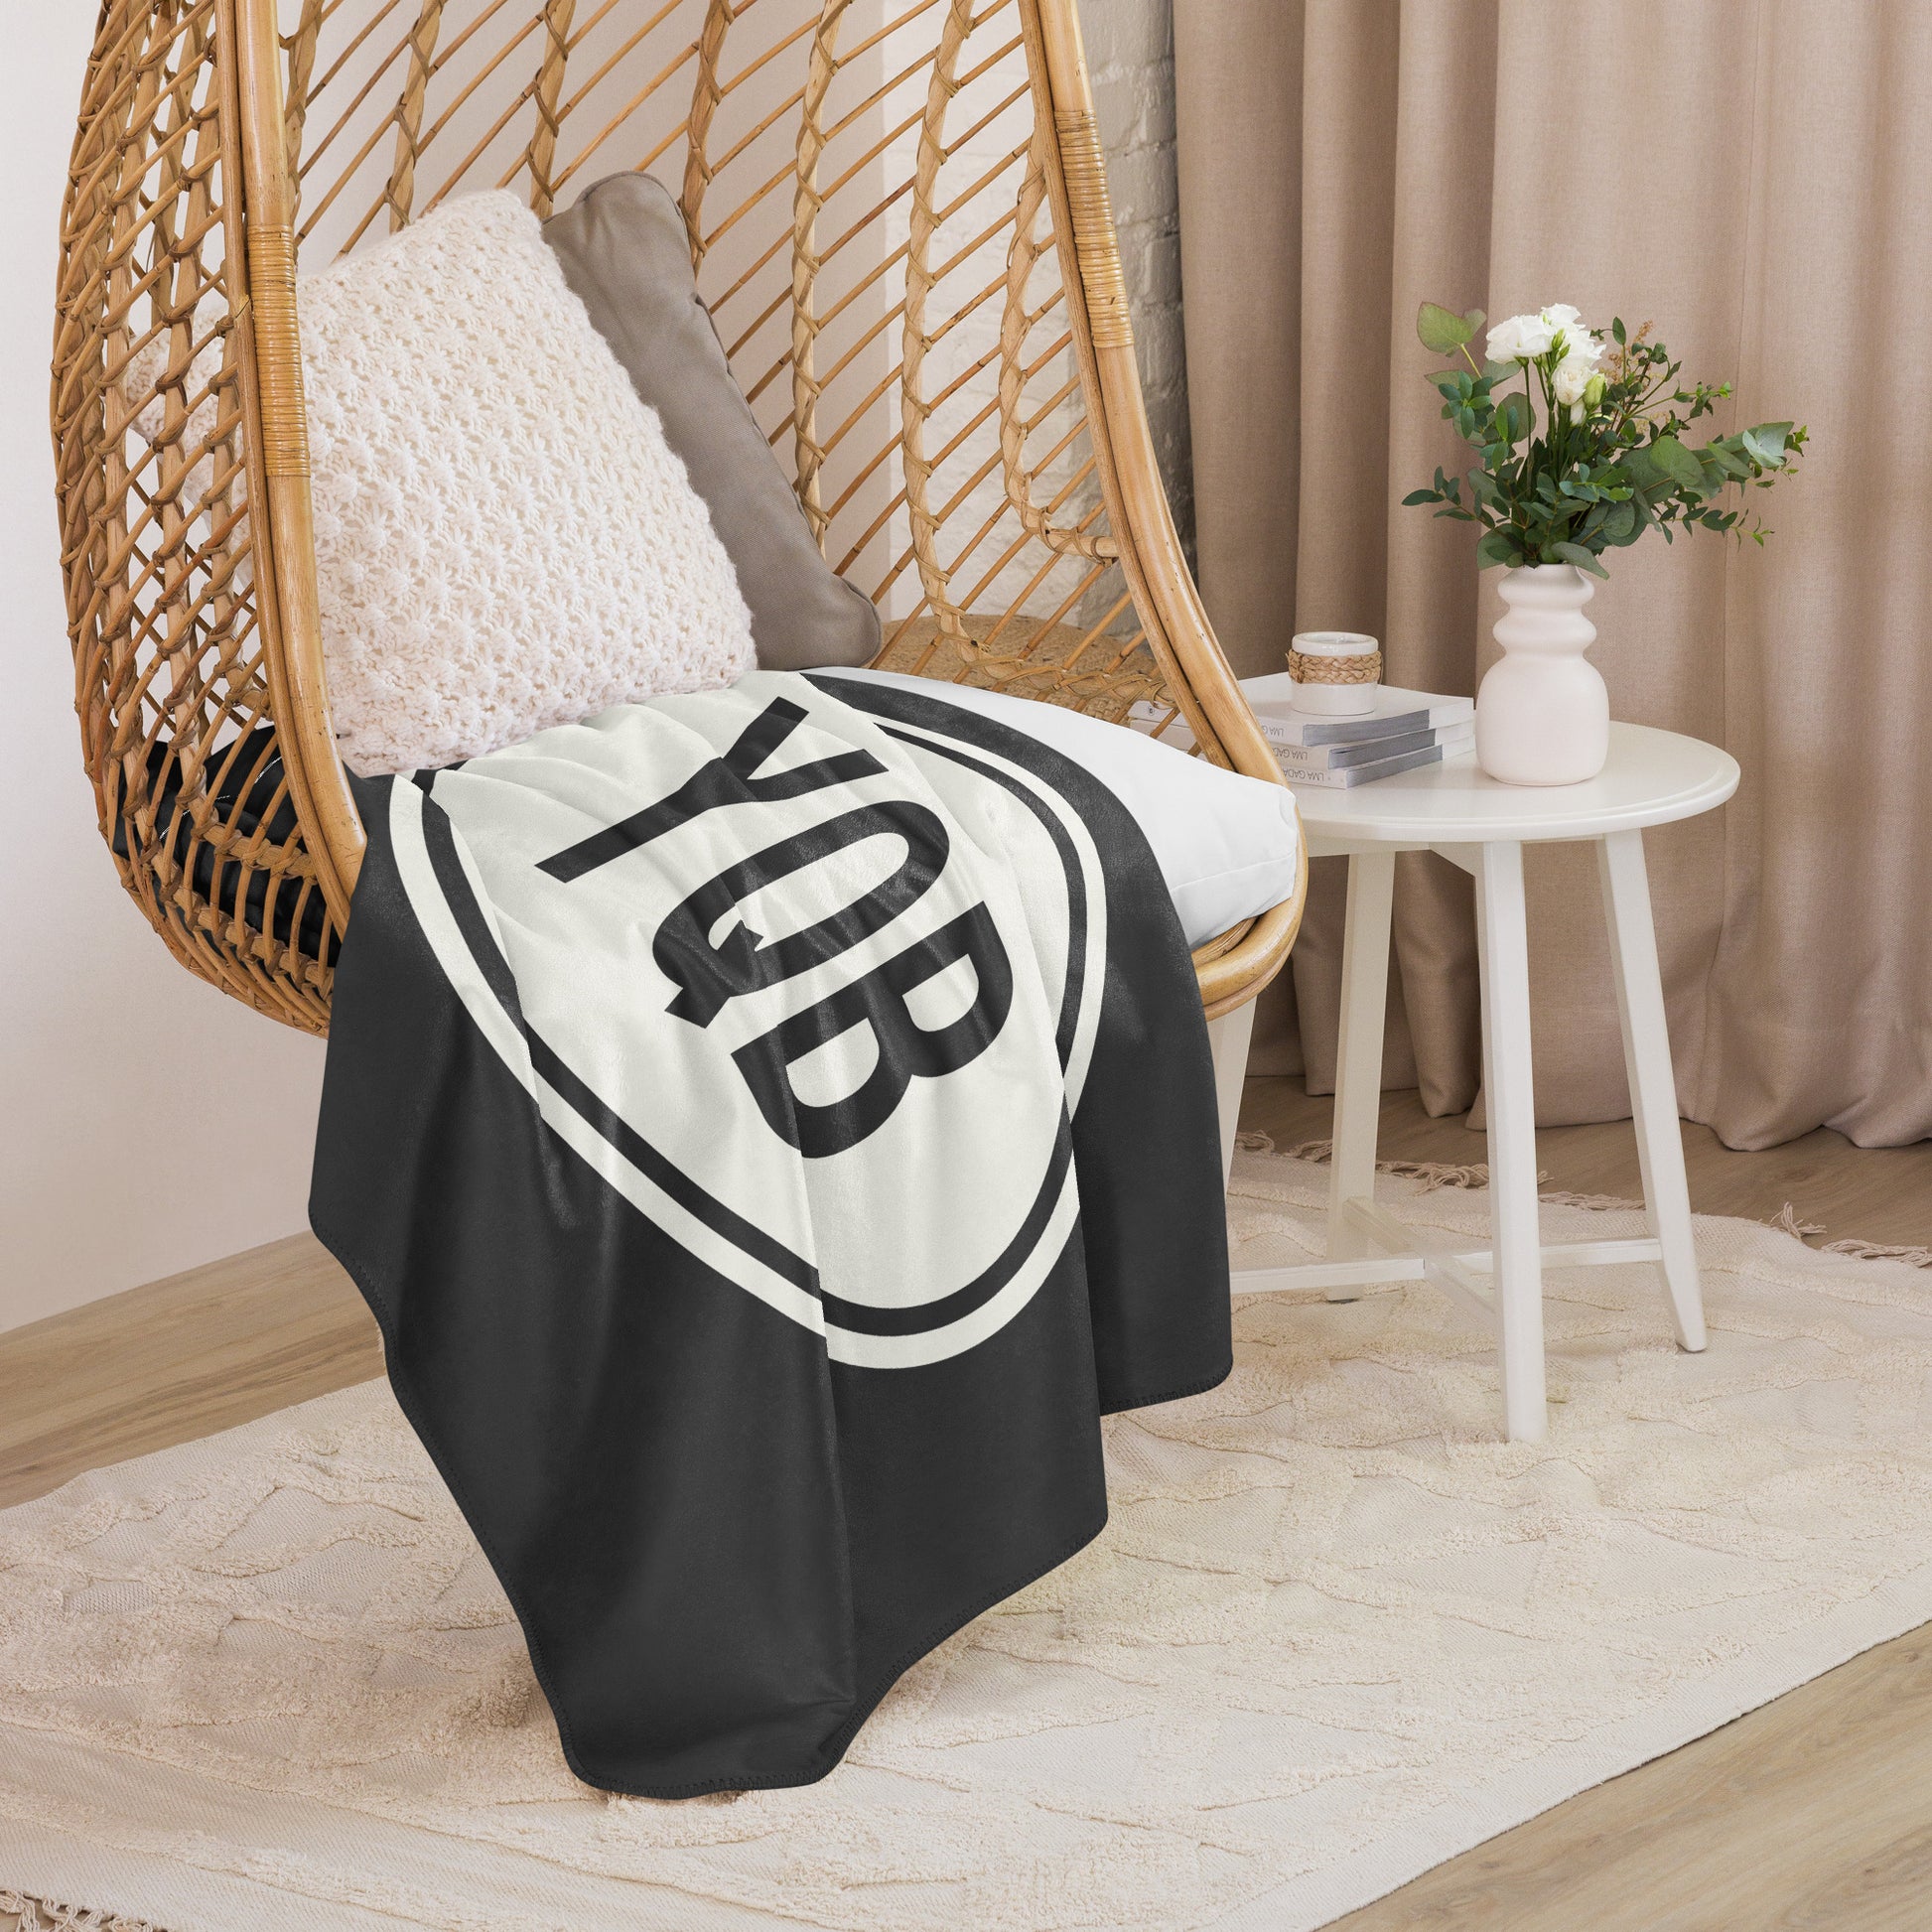 Unique Travel Gift Sherpa Blanket - White Oval • YQB Quebec City • YHM Designs - Image 06